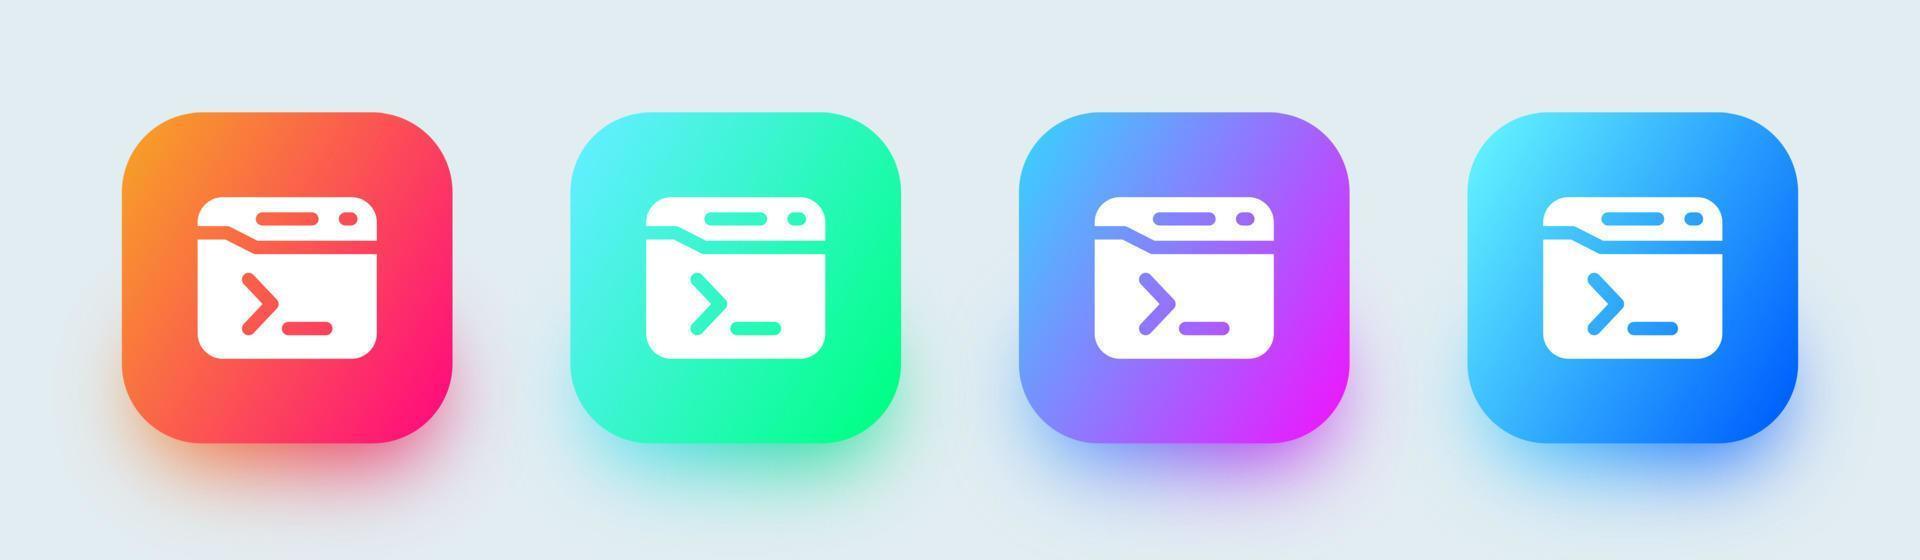 Terminal solid icon in square gradient colors. Code signs vector illustration.